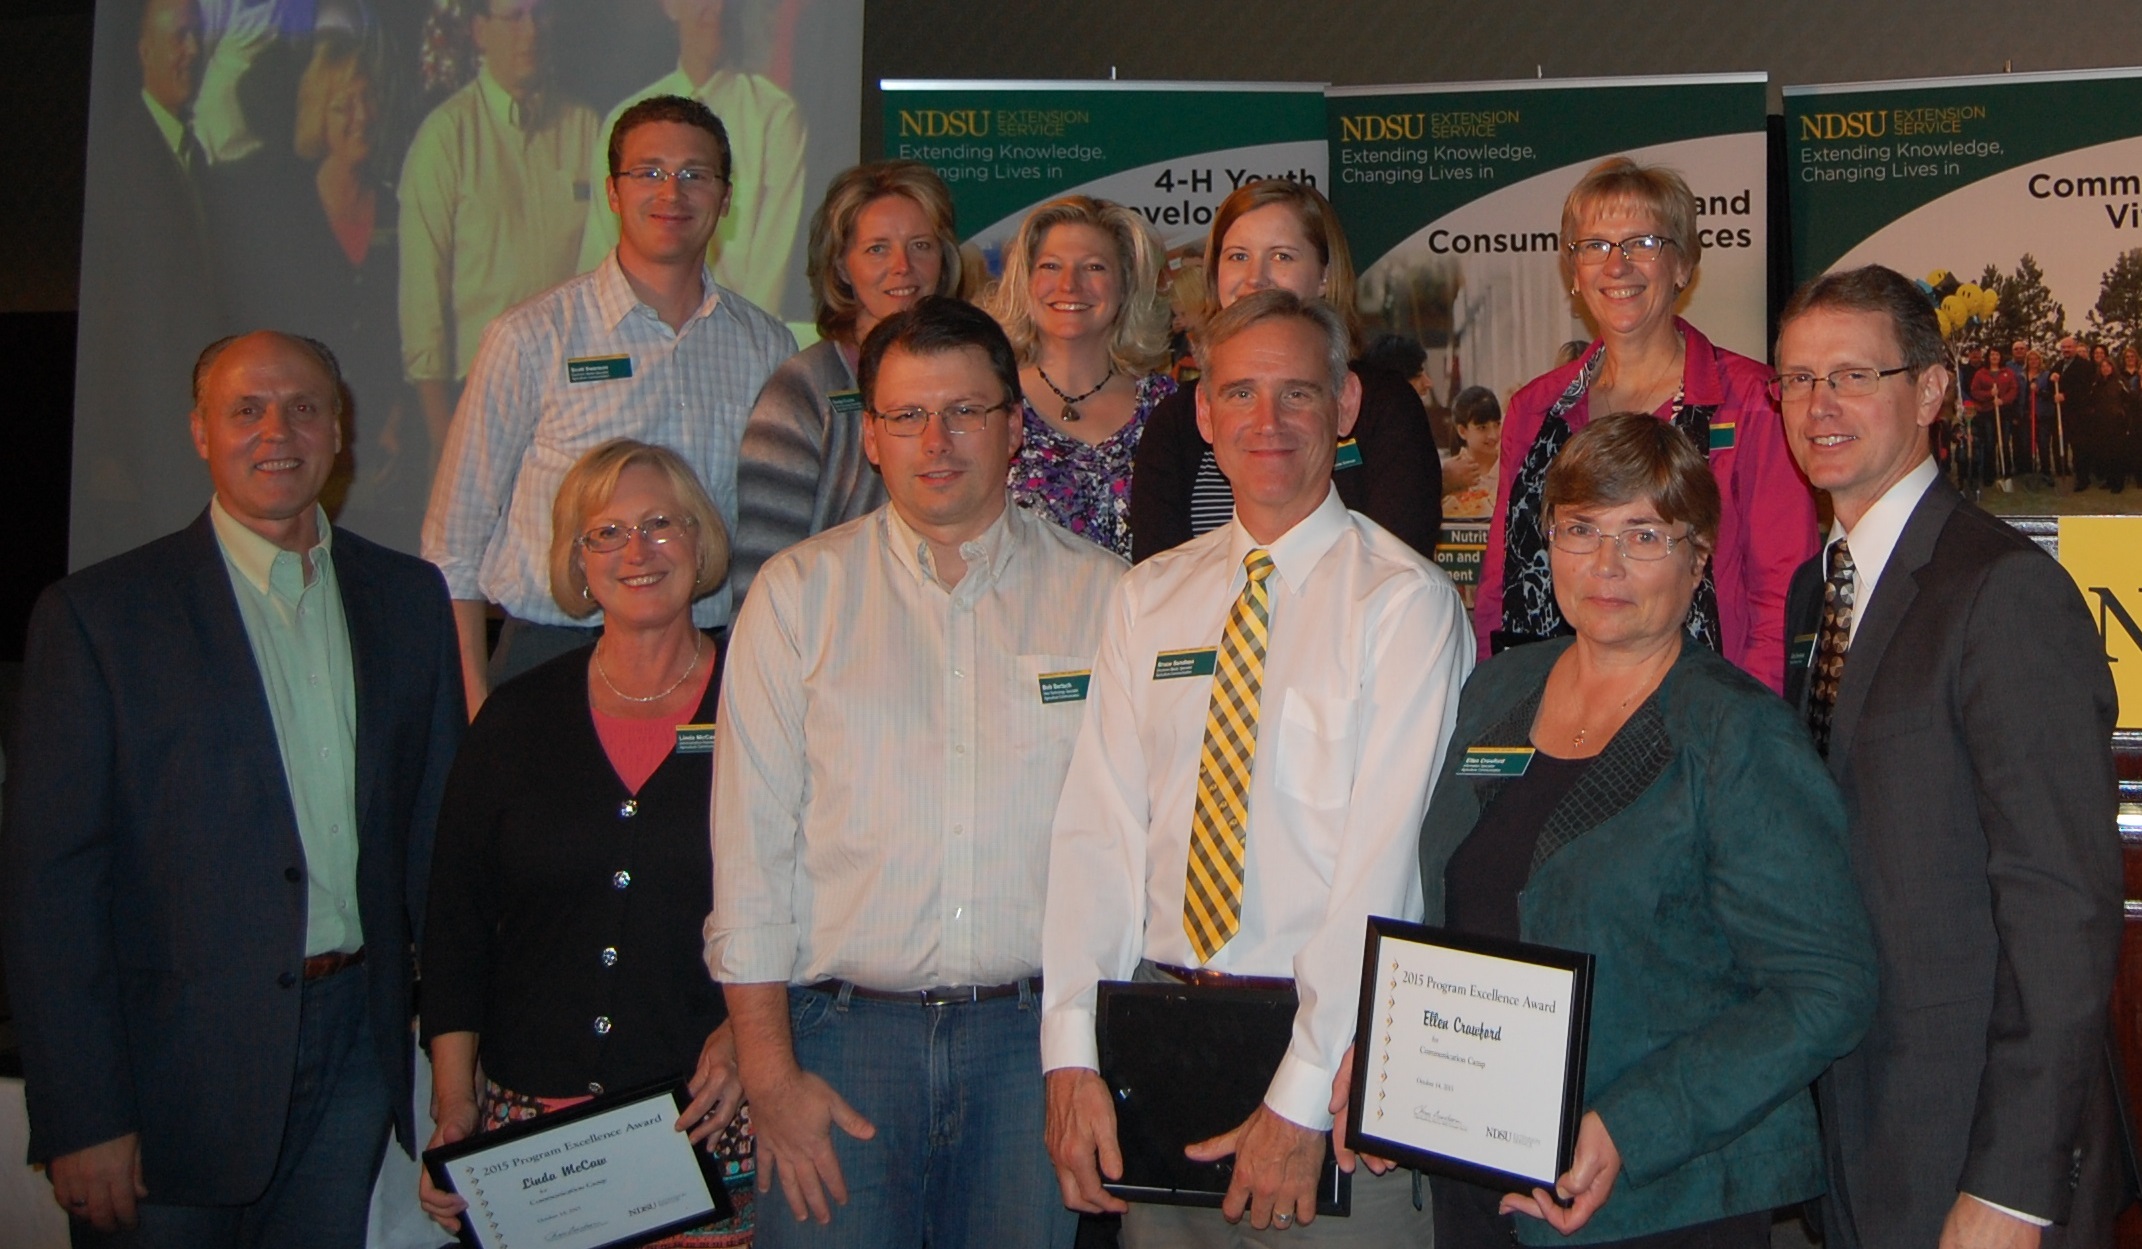 Patrick Sitter, general manager, Farm and Ranch Guide, and Chris Boerboom, NDSU Extension Service director, present a Program Excellence Award to this team for its development of the Communication Camp. Pictured are (front row, left to right) Sitter; Linda McCaw, administrative assistant, Agriculture Communication; Bob Bertsch, Web technology specialist, Agriculture Communication; Bruce Sundeen, electronic media specialist, Agriculture Communication; Ellen Crawford, information specialist, Agriculture Communication; Boerboom; (back row, left to right) Scott Swanson, electronic media specialist, Agriculture Communication; Sonja Fuchs, Web technology specialist, Agriculture Communication; Susan Finneseth, program manager, EFNEP and Family Nutrition Program; Stacy Wang, Extension associate, Health, Nutrition and Exercise Sciences; Becky Koch, director, Agriculture Communication. (NDSU photo)